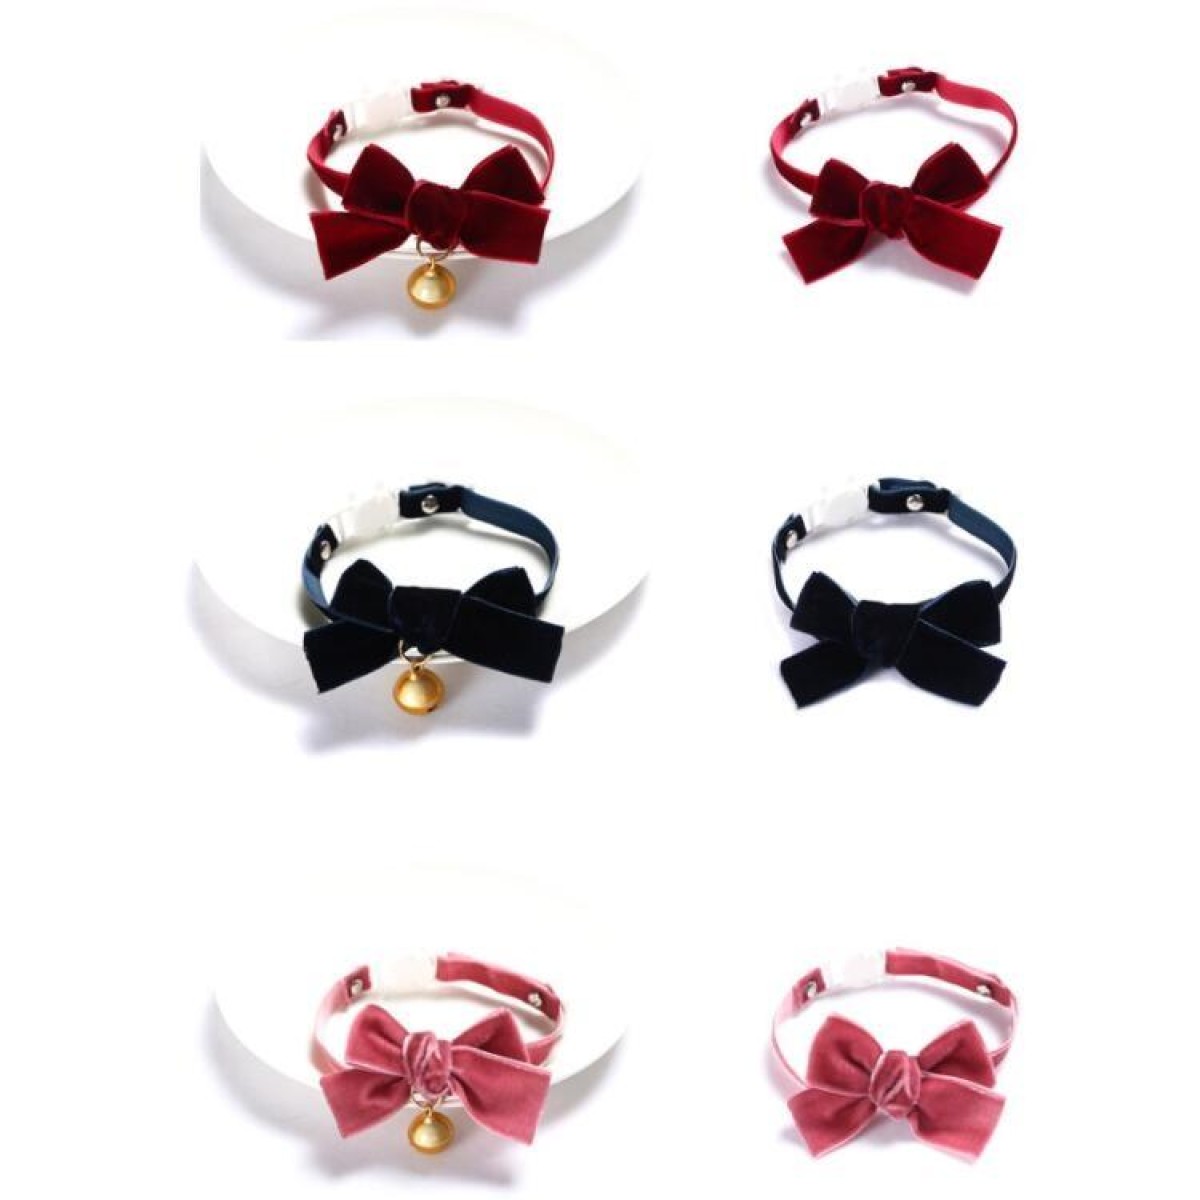 Velvet Bowknot Adjustable Pet Collar Cat Dog Rabbit Bow Tie Accessories, Size:S 17-30cm, Style:Bowknot With Bell(Blue)